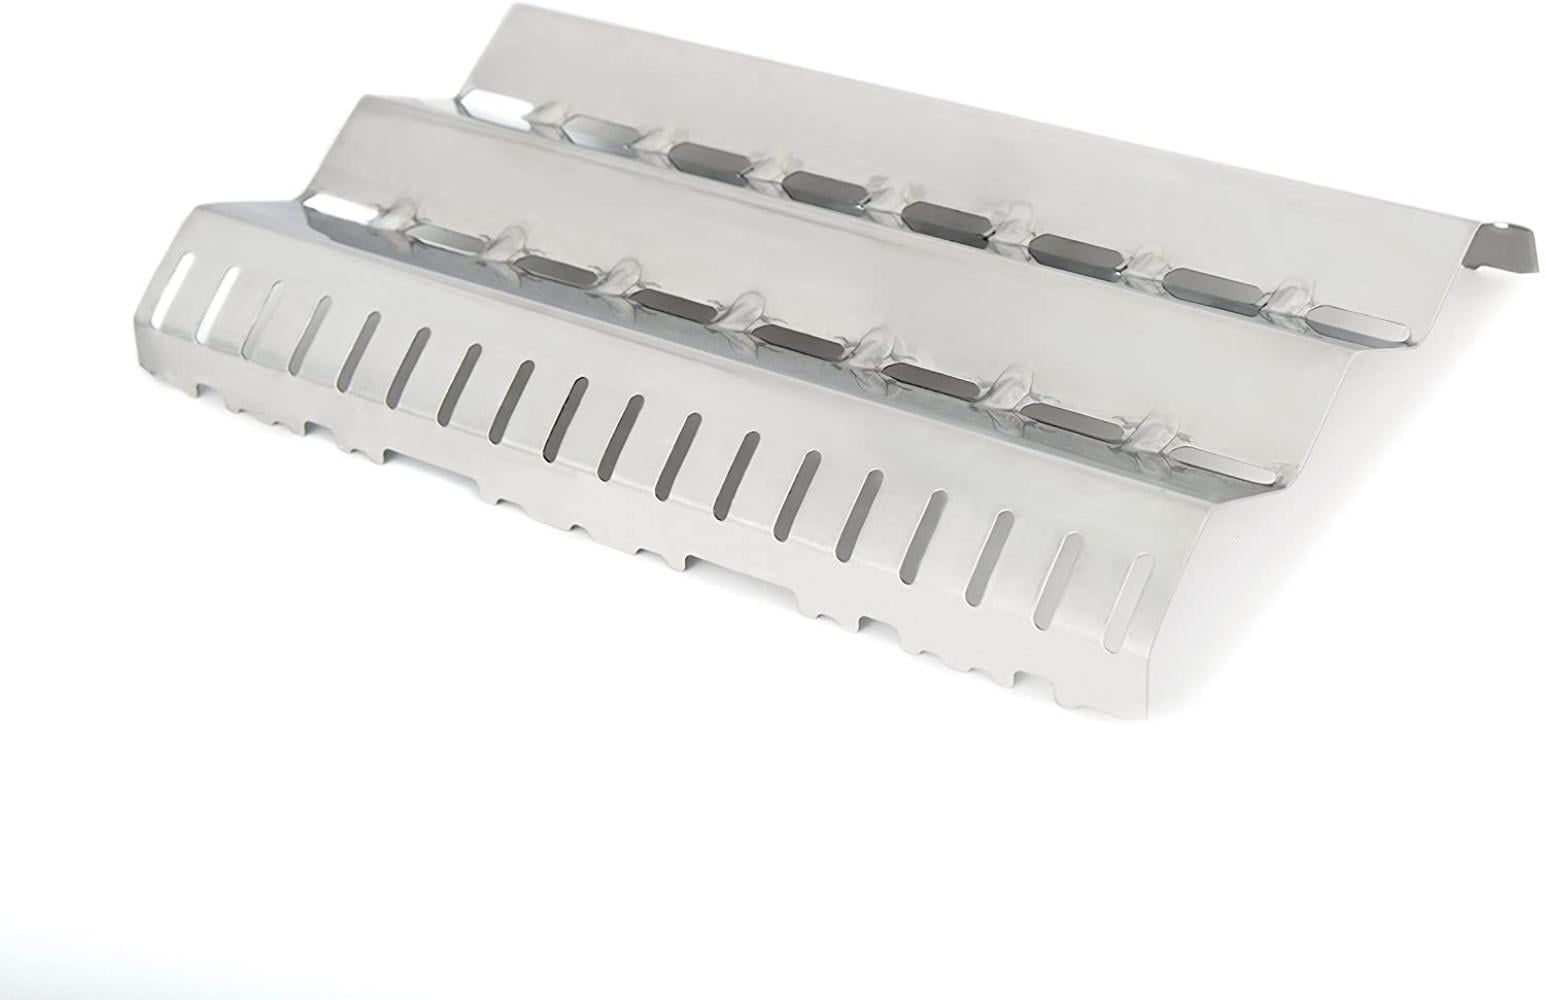 Broil King Broil Mate Stainless Grill Heat Plate Flavor-R-Wave 18" x 11" 18440 